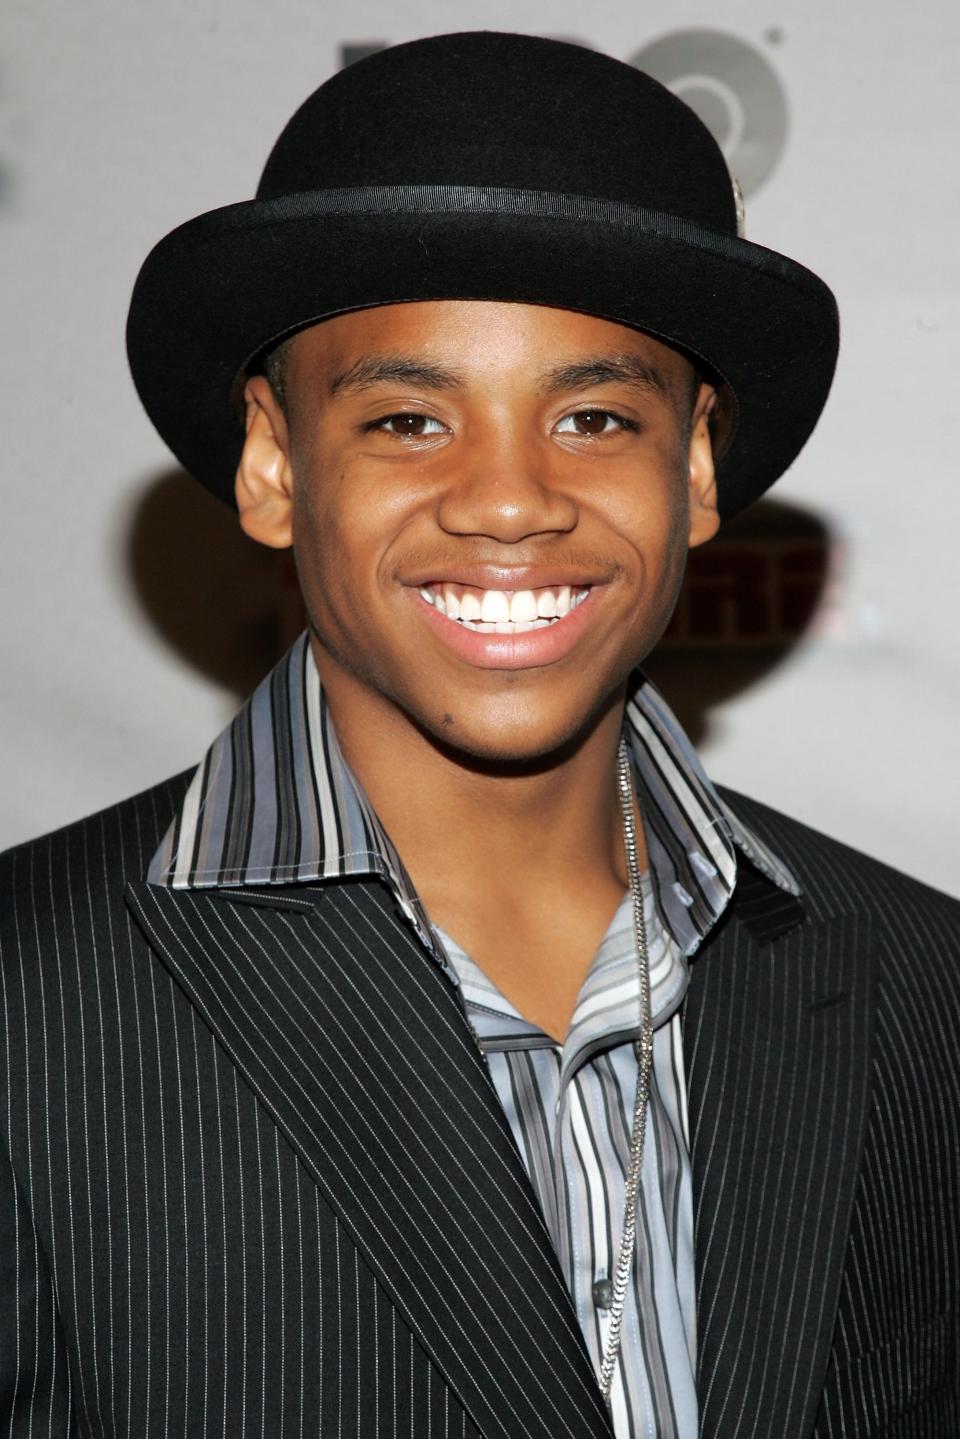 Where you know them: As a child actor, Tristan Wilds appeared in the Ryan Gosling film, Half Nelson, The Secret Life of Bees, and Seasons 4 and 5 of The Wire.